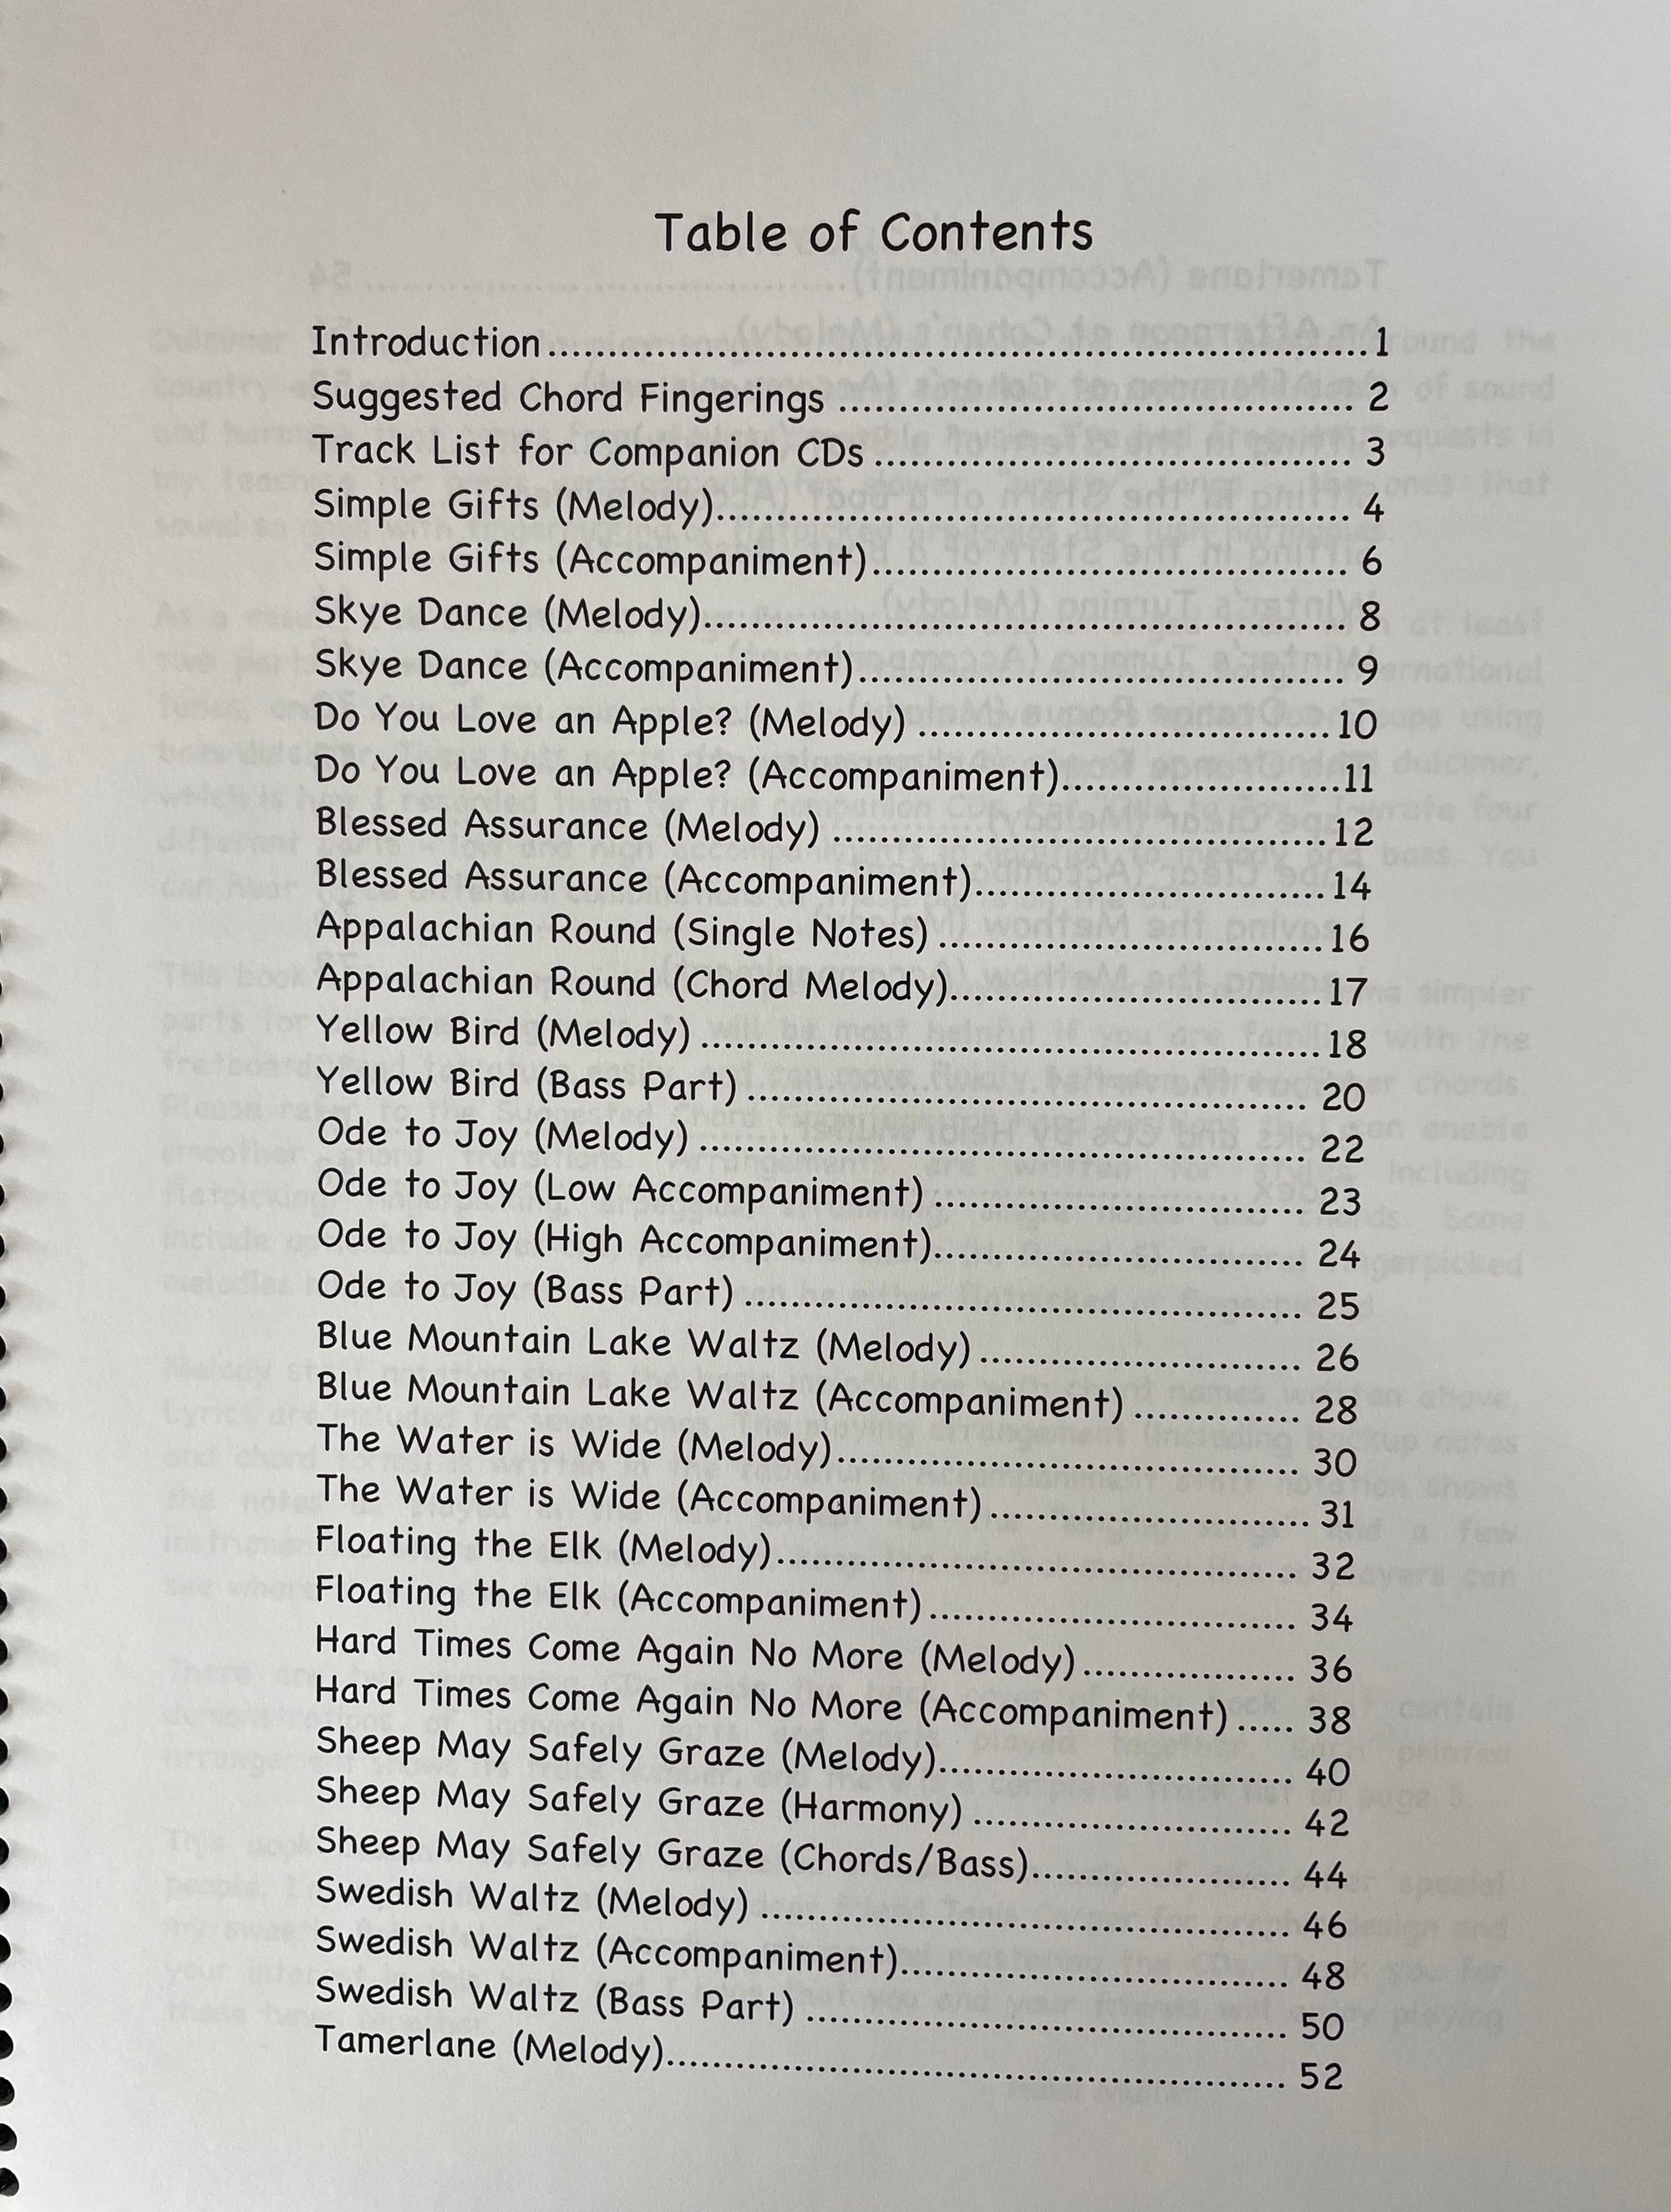 Table of contents for Dulcimer Duos - Book/CD by Heidi Muller showing titles of various pieces divided into categories like simple gifts (strummed melodies), appalachian spring, and fare thee well (dance).